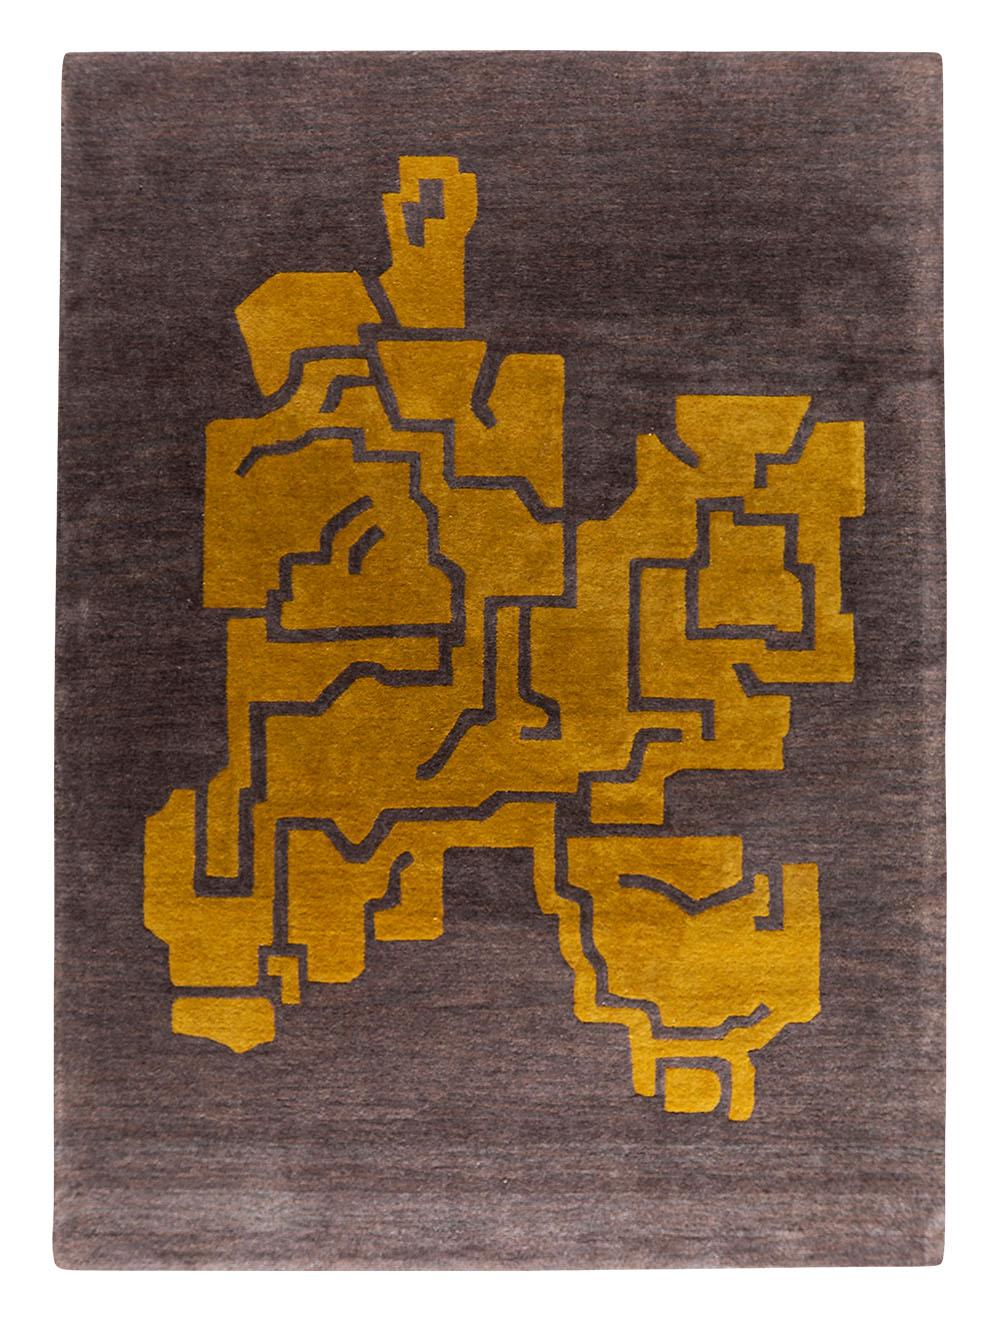 Fragment 1 structures carpet by Massimo Copenhagen
Designed by OEO Studio
Handtufted
Materials: 50% New Zealand Wool – 50% Bamboo
Dimensions: W 300 x H 400 cm.
Available colors: Fragment 1, Fragment 2, Fragment 2 with Border, Fragment 3, and